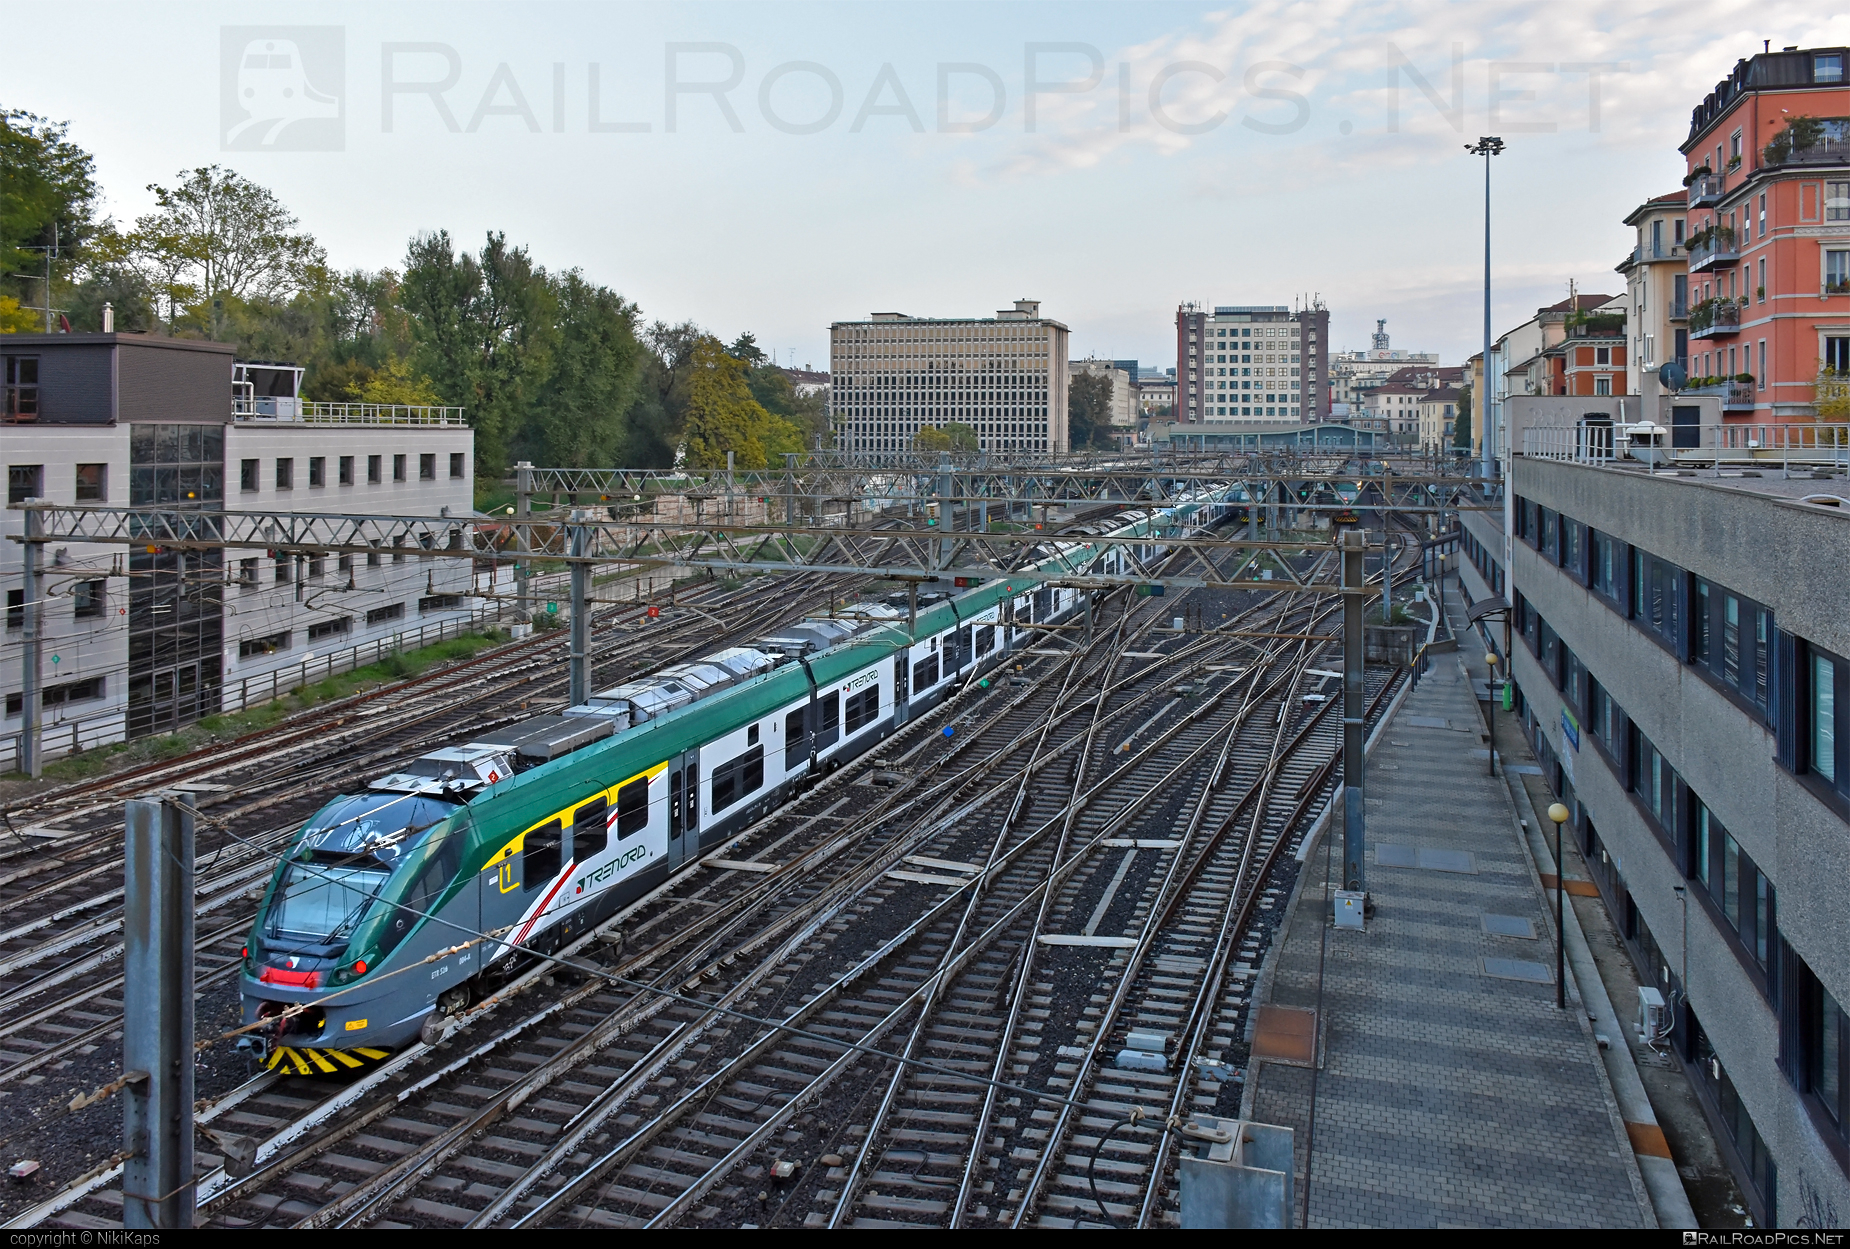 Alstom Coradia Meridian (ETR.526) - ETR 526 004-A operated by TRENORD #alstom #alstomCoradia #coradia #coradiaMeridian #etr526 #trenord